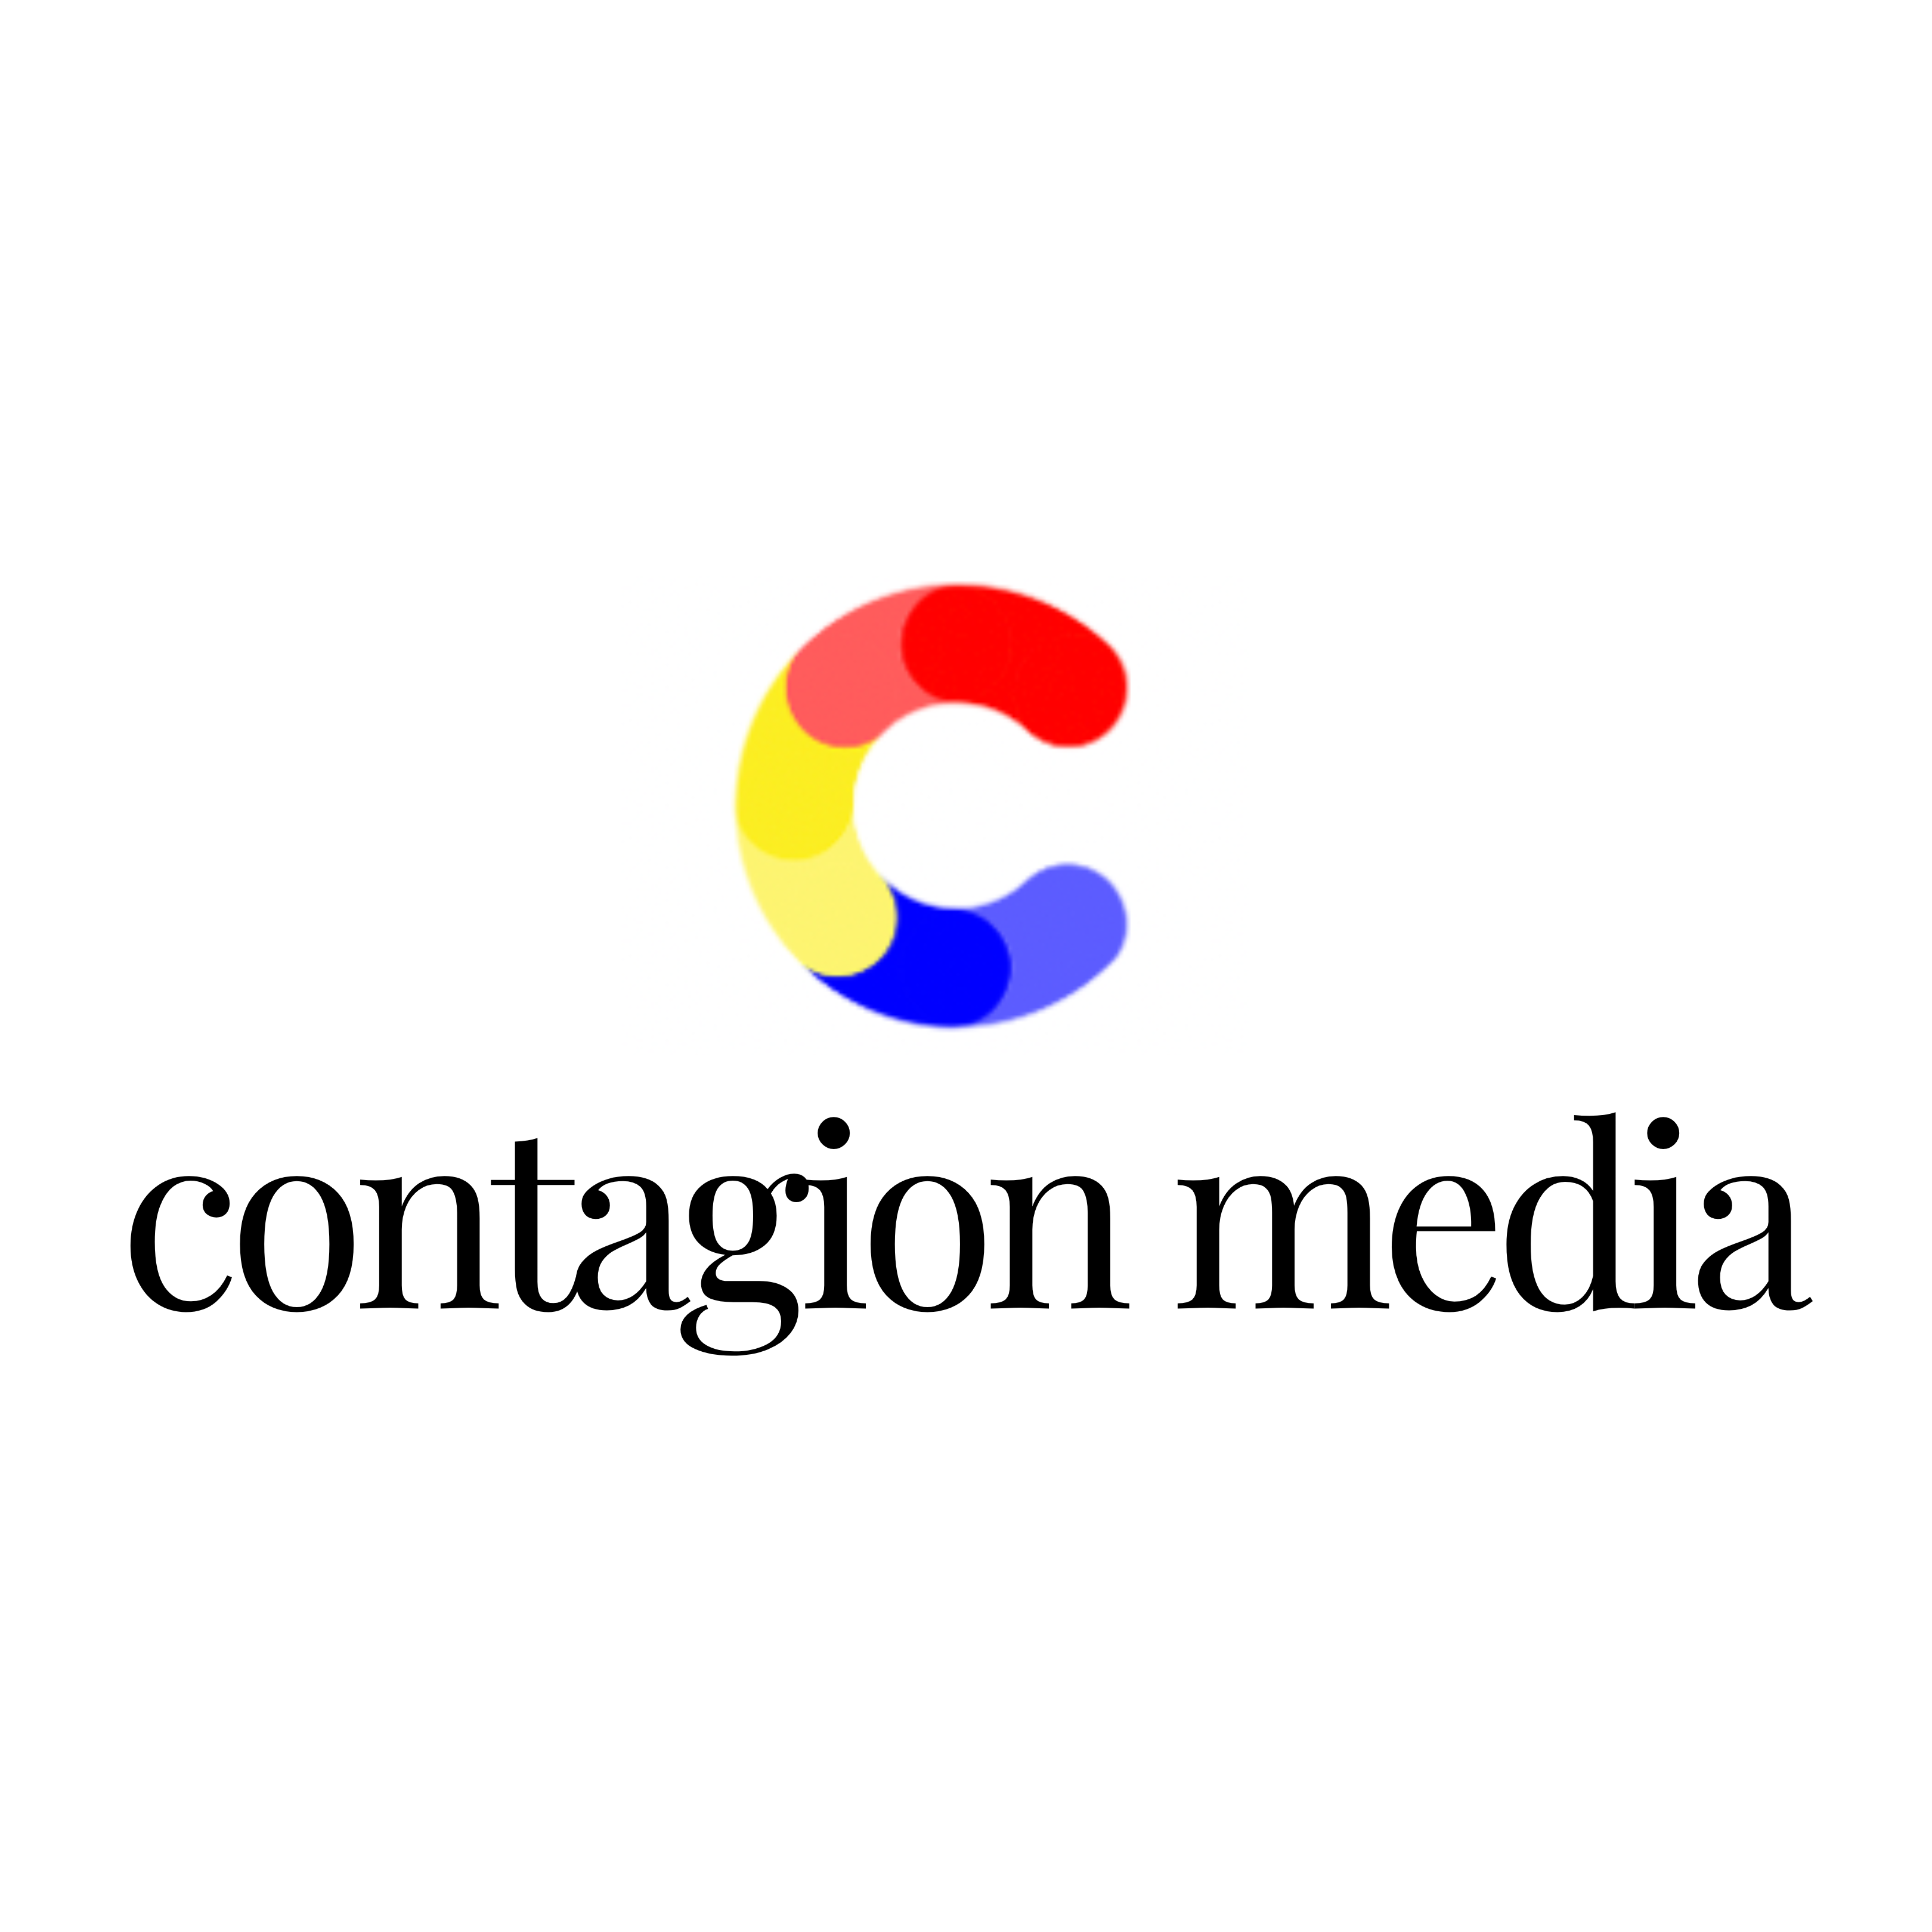 New Artists and Models Are Being Seen At Contagion Media